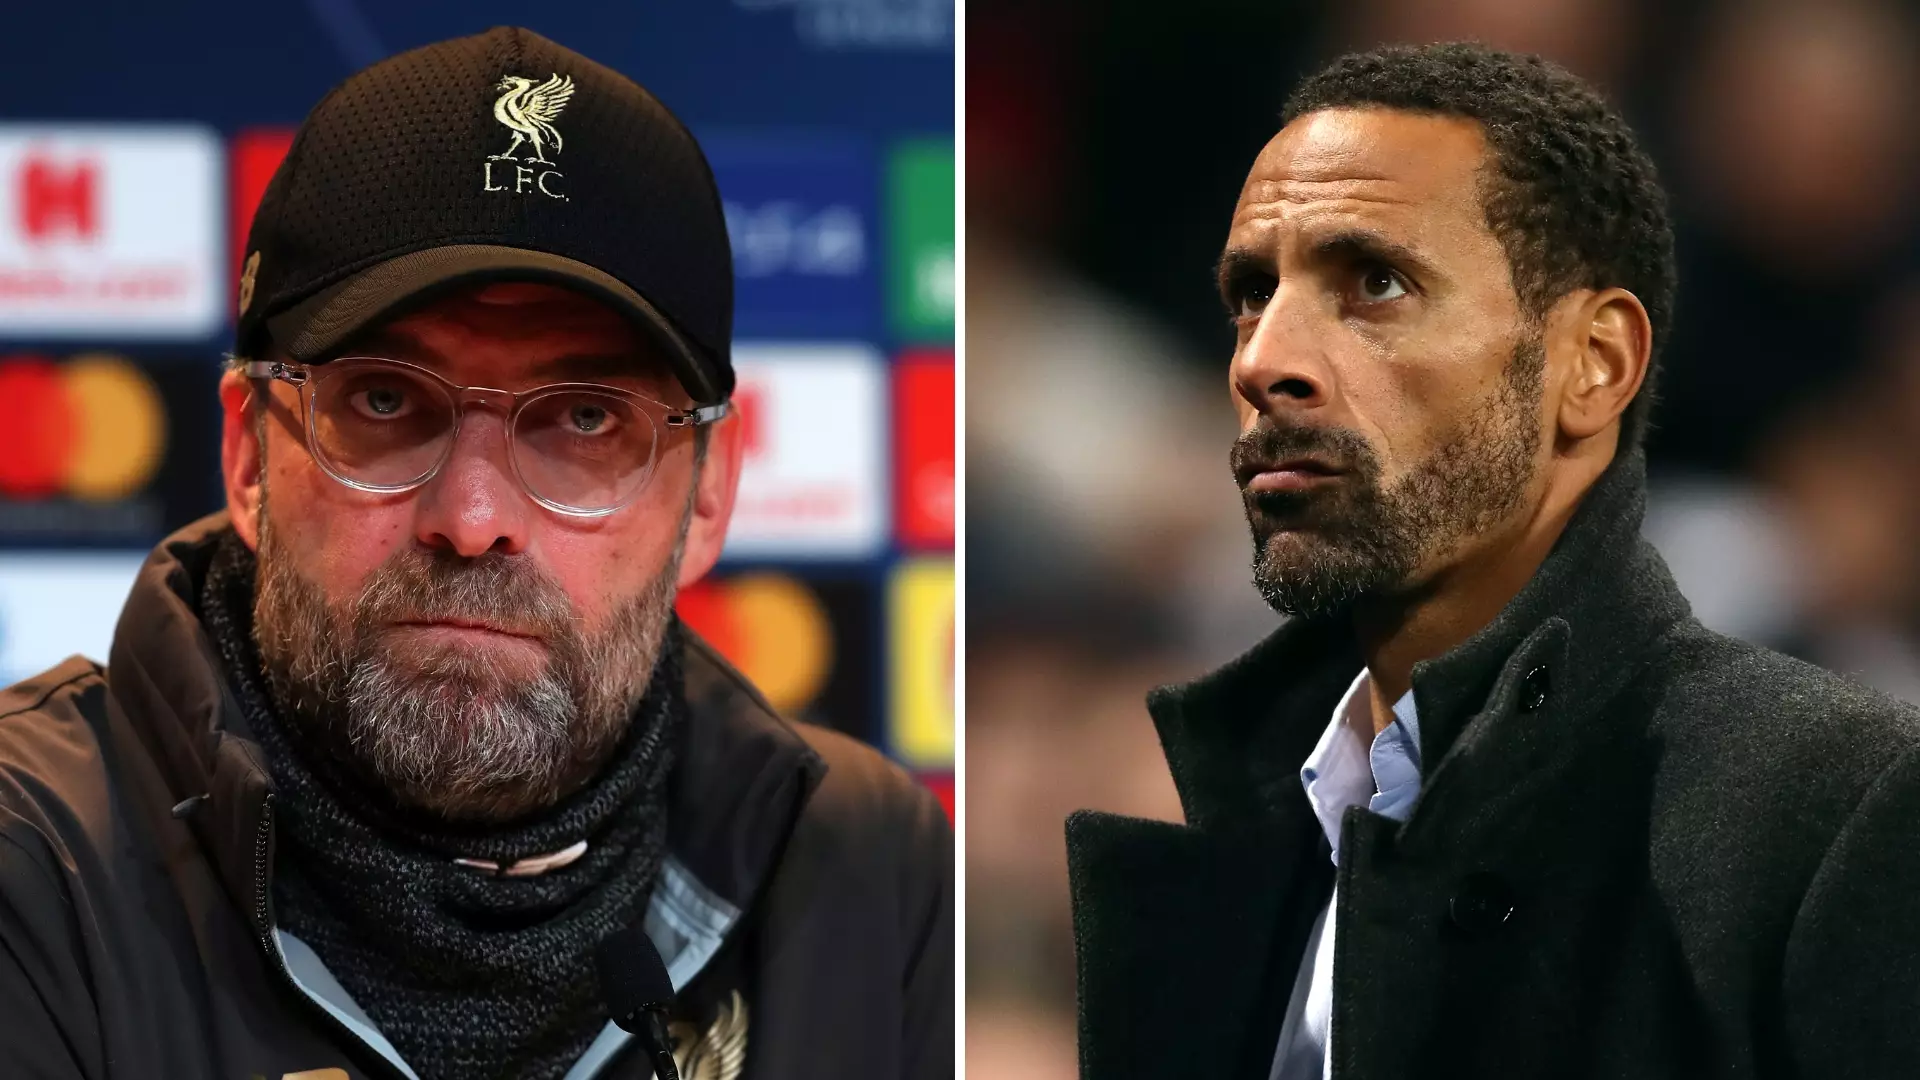 Rio Ferdinand Mocks Liverpool Fans For Coming 'Out Of The Woodwork After 20 Years'